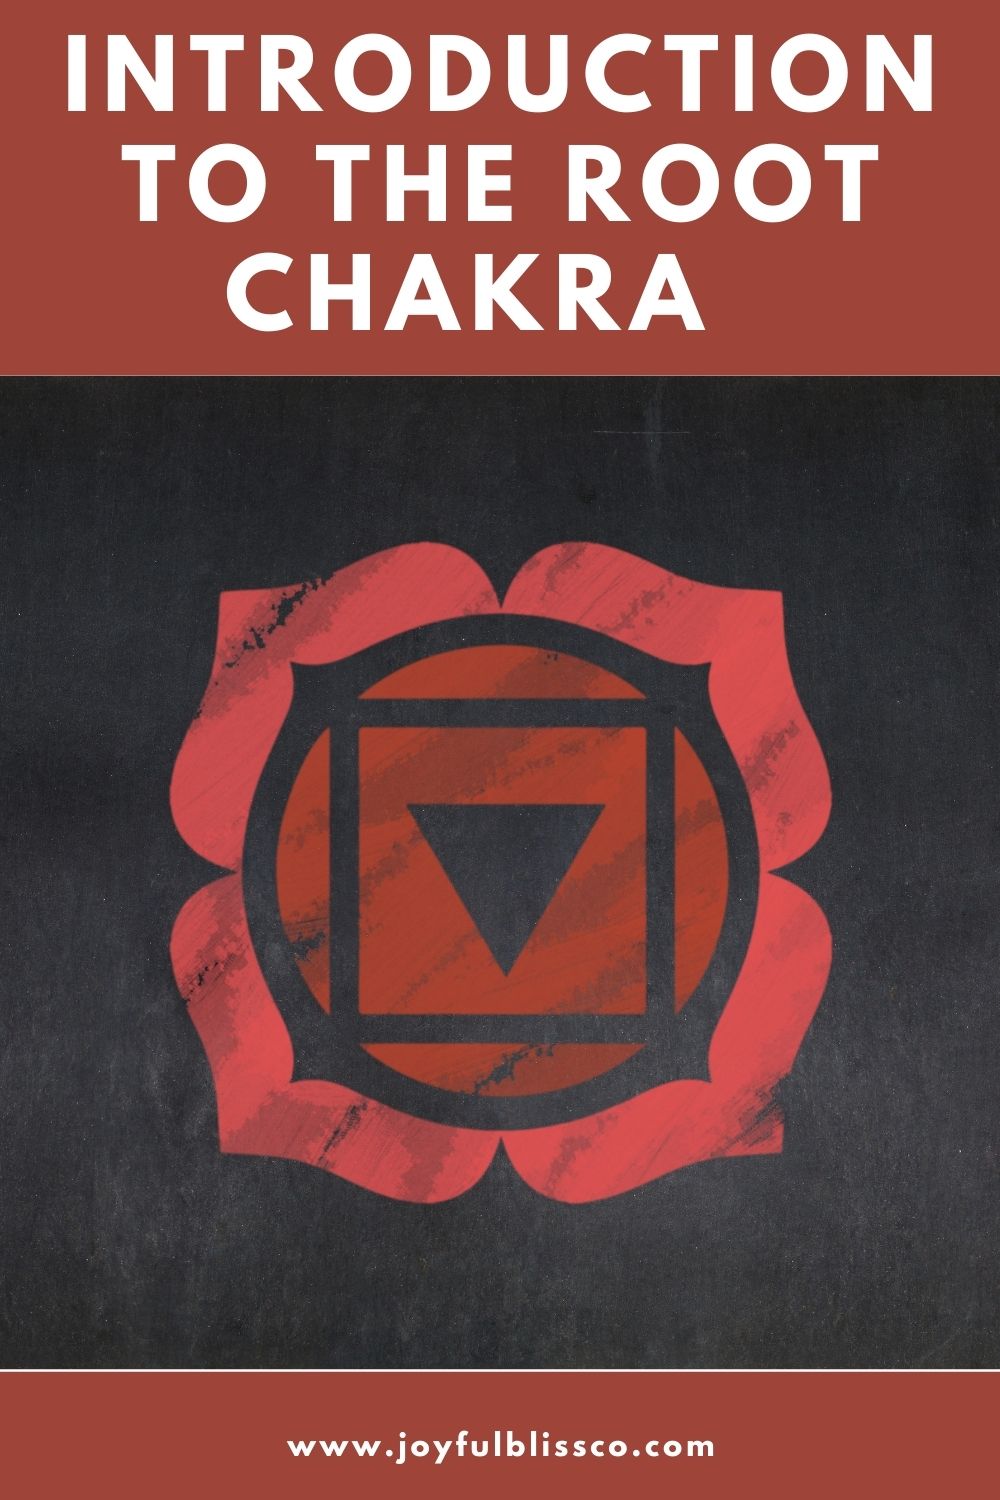 INTRODUCTION TO THE ROOT CHAKRA